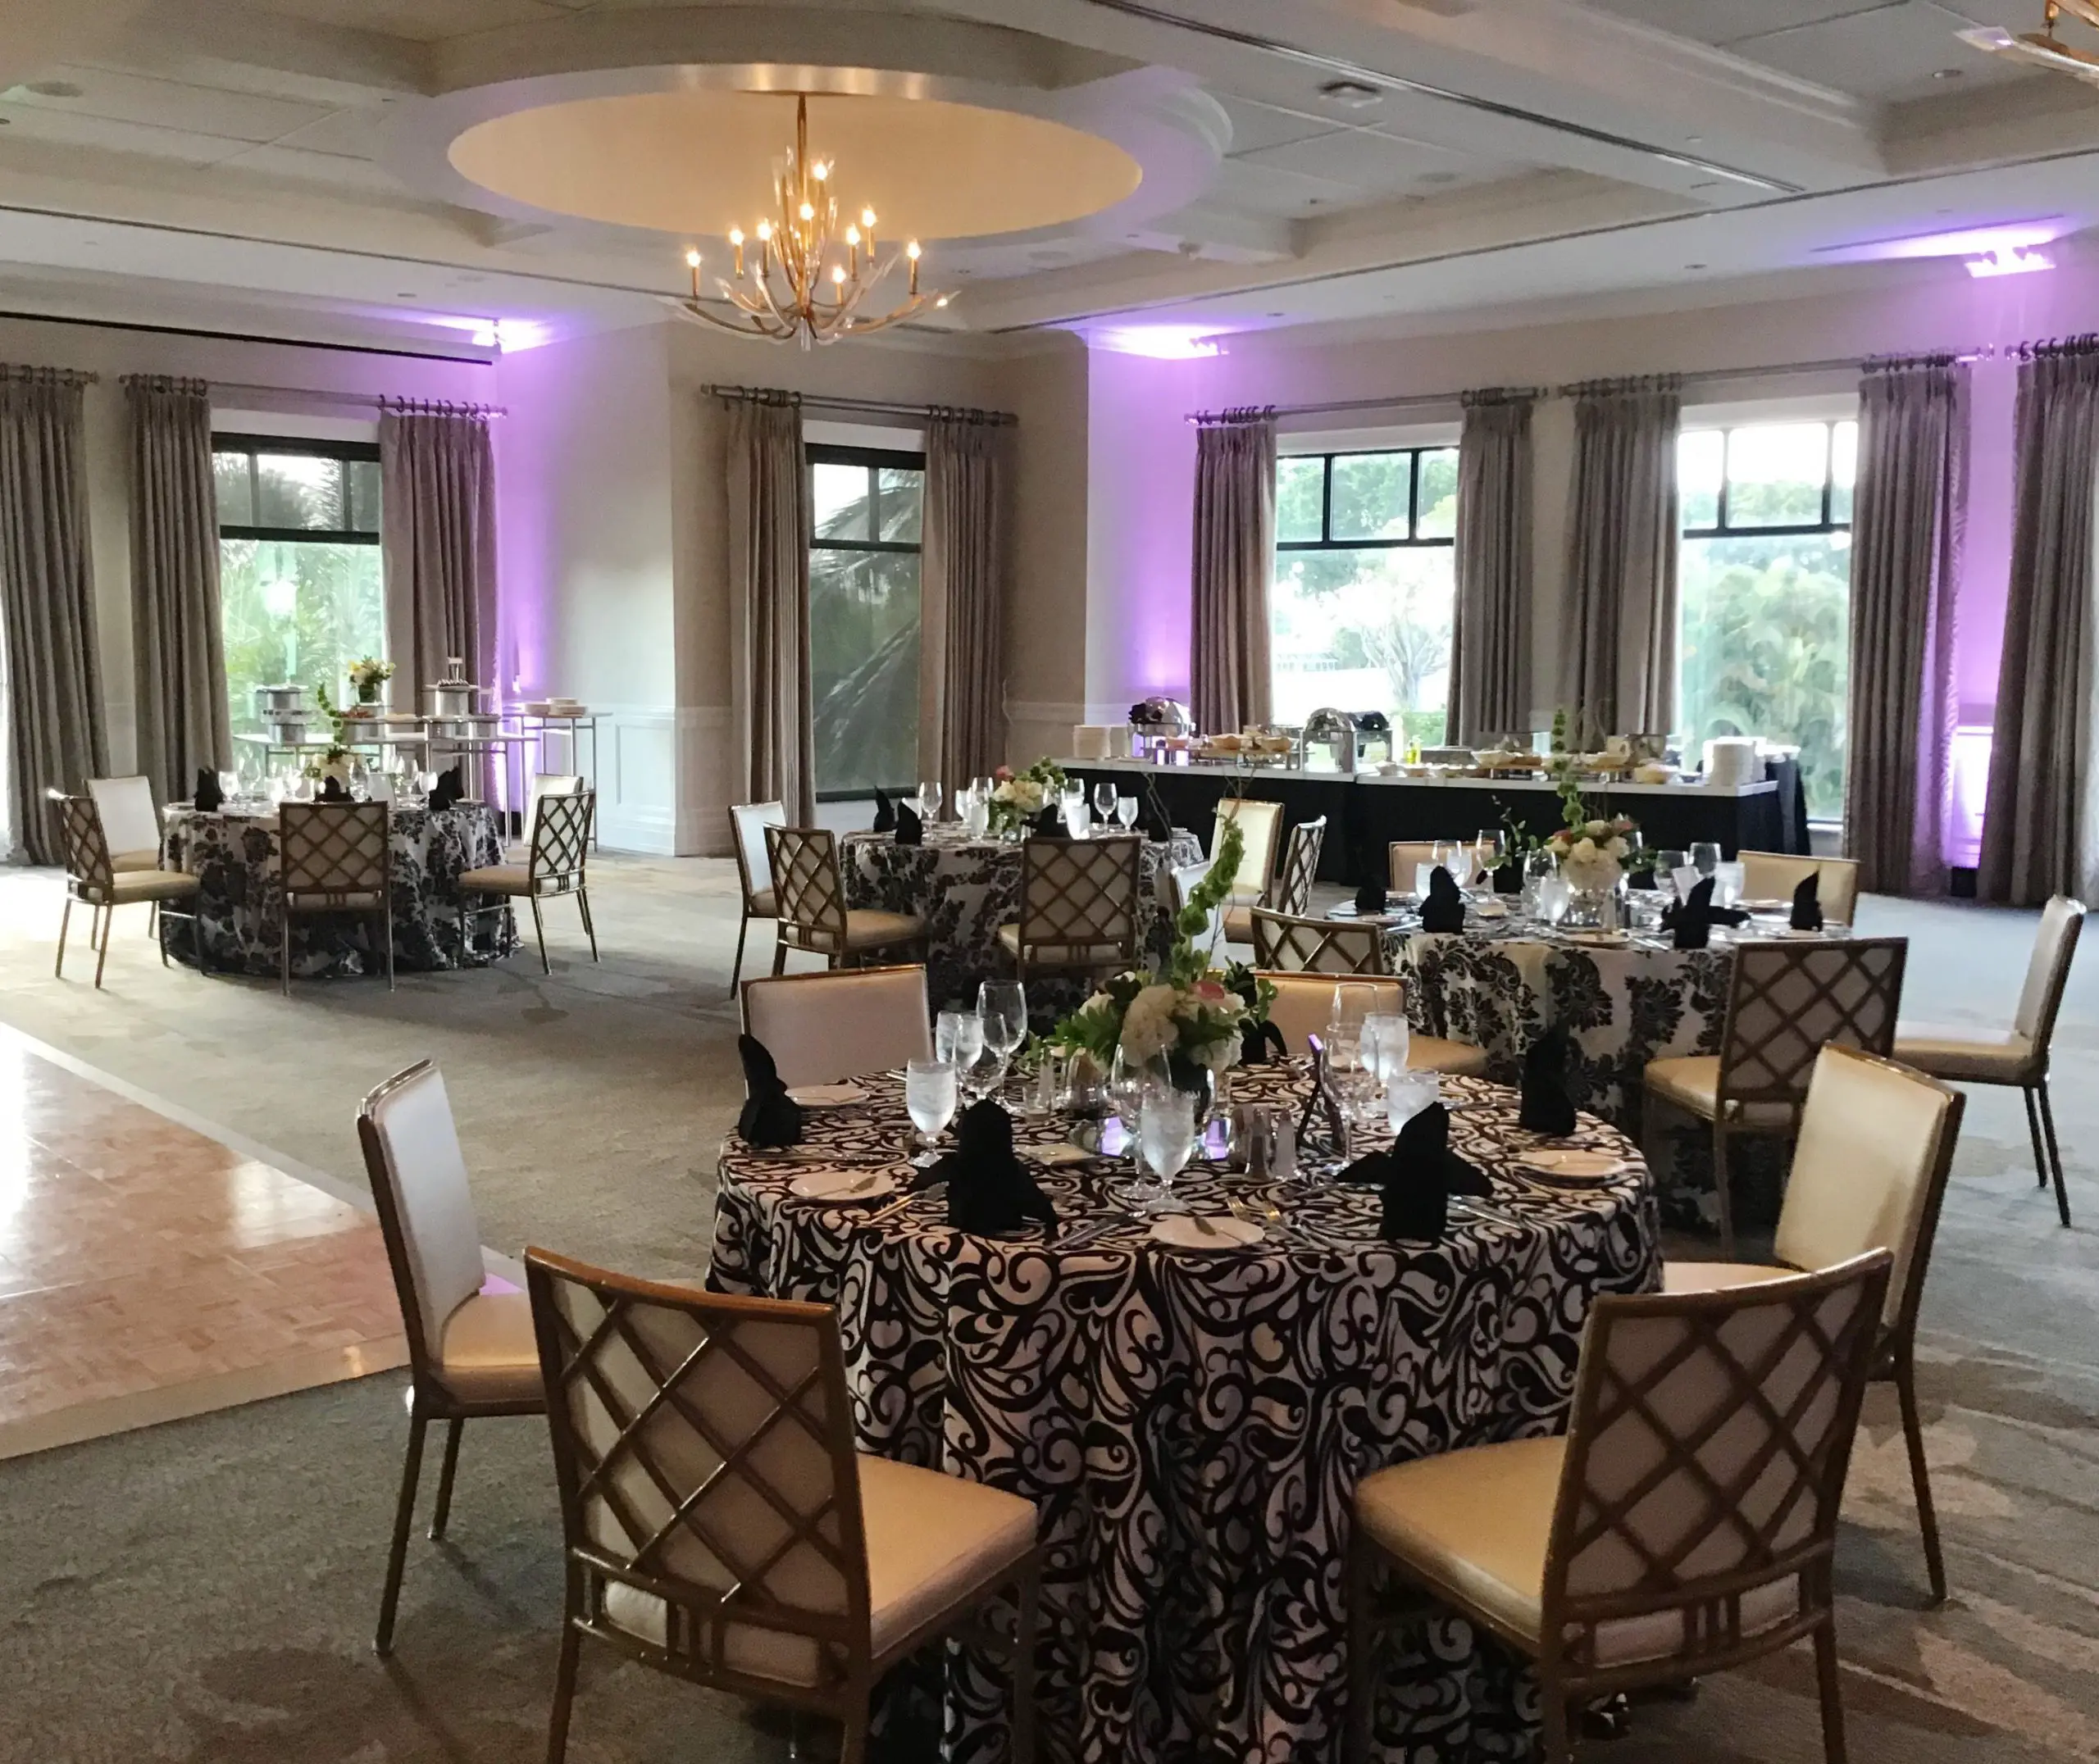 Our ballroom is perfect for your reception.